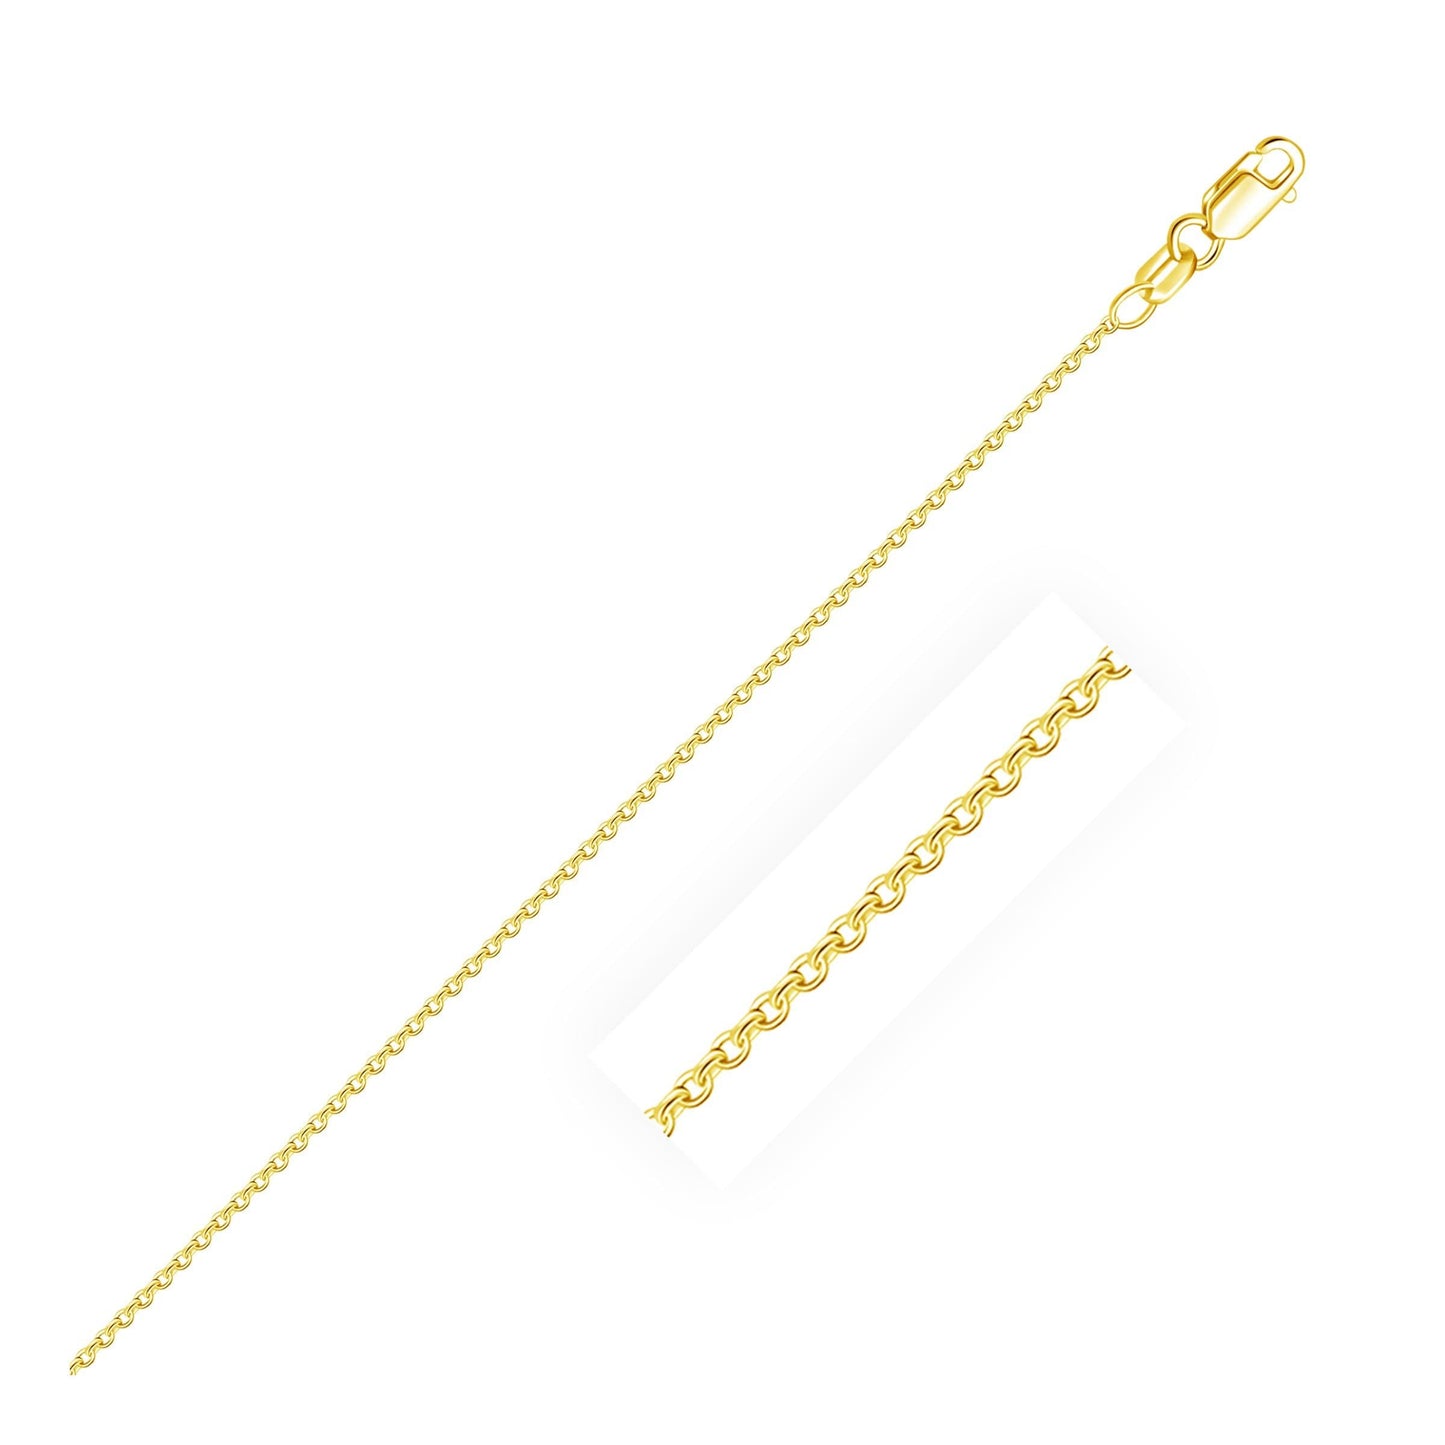 14k Yellow Gold Round Cable Link Chain in 1.2 mm